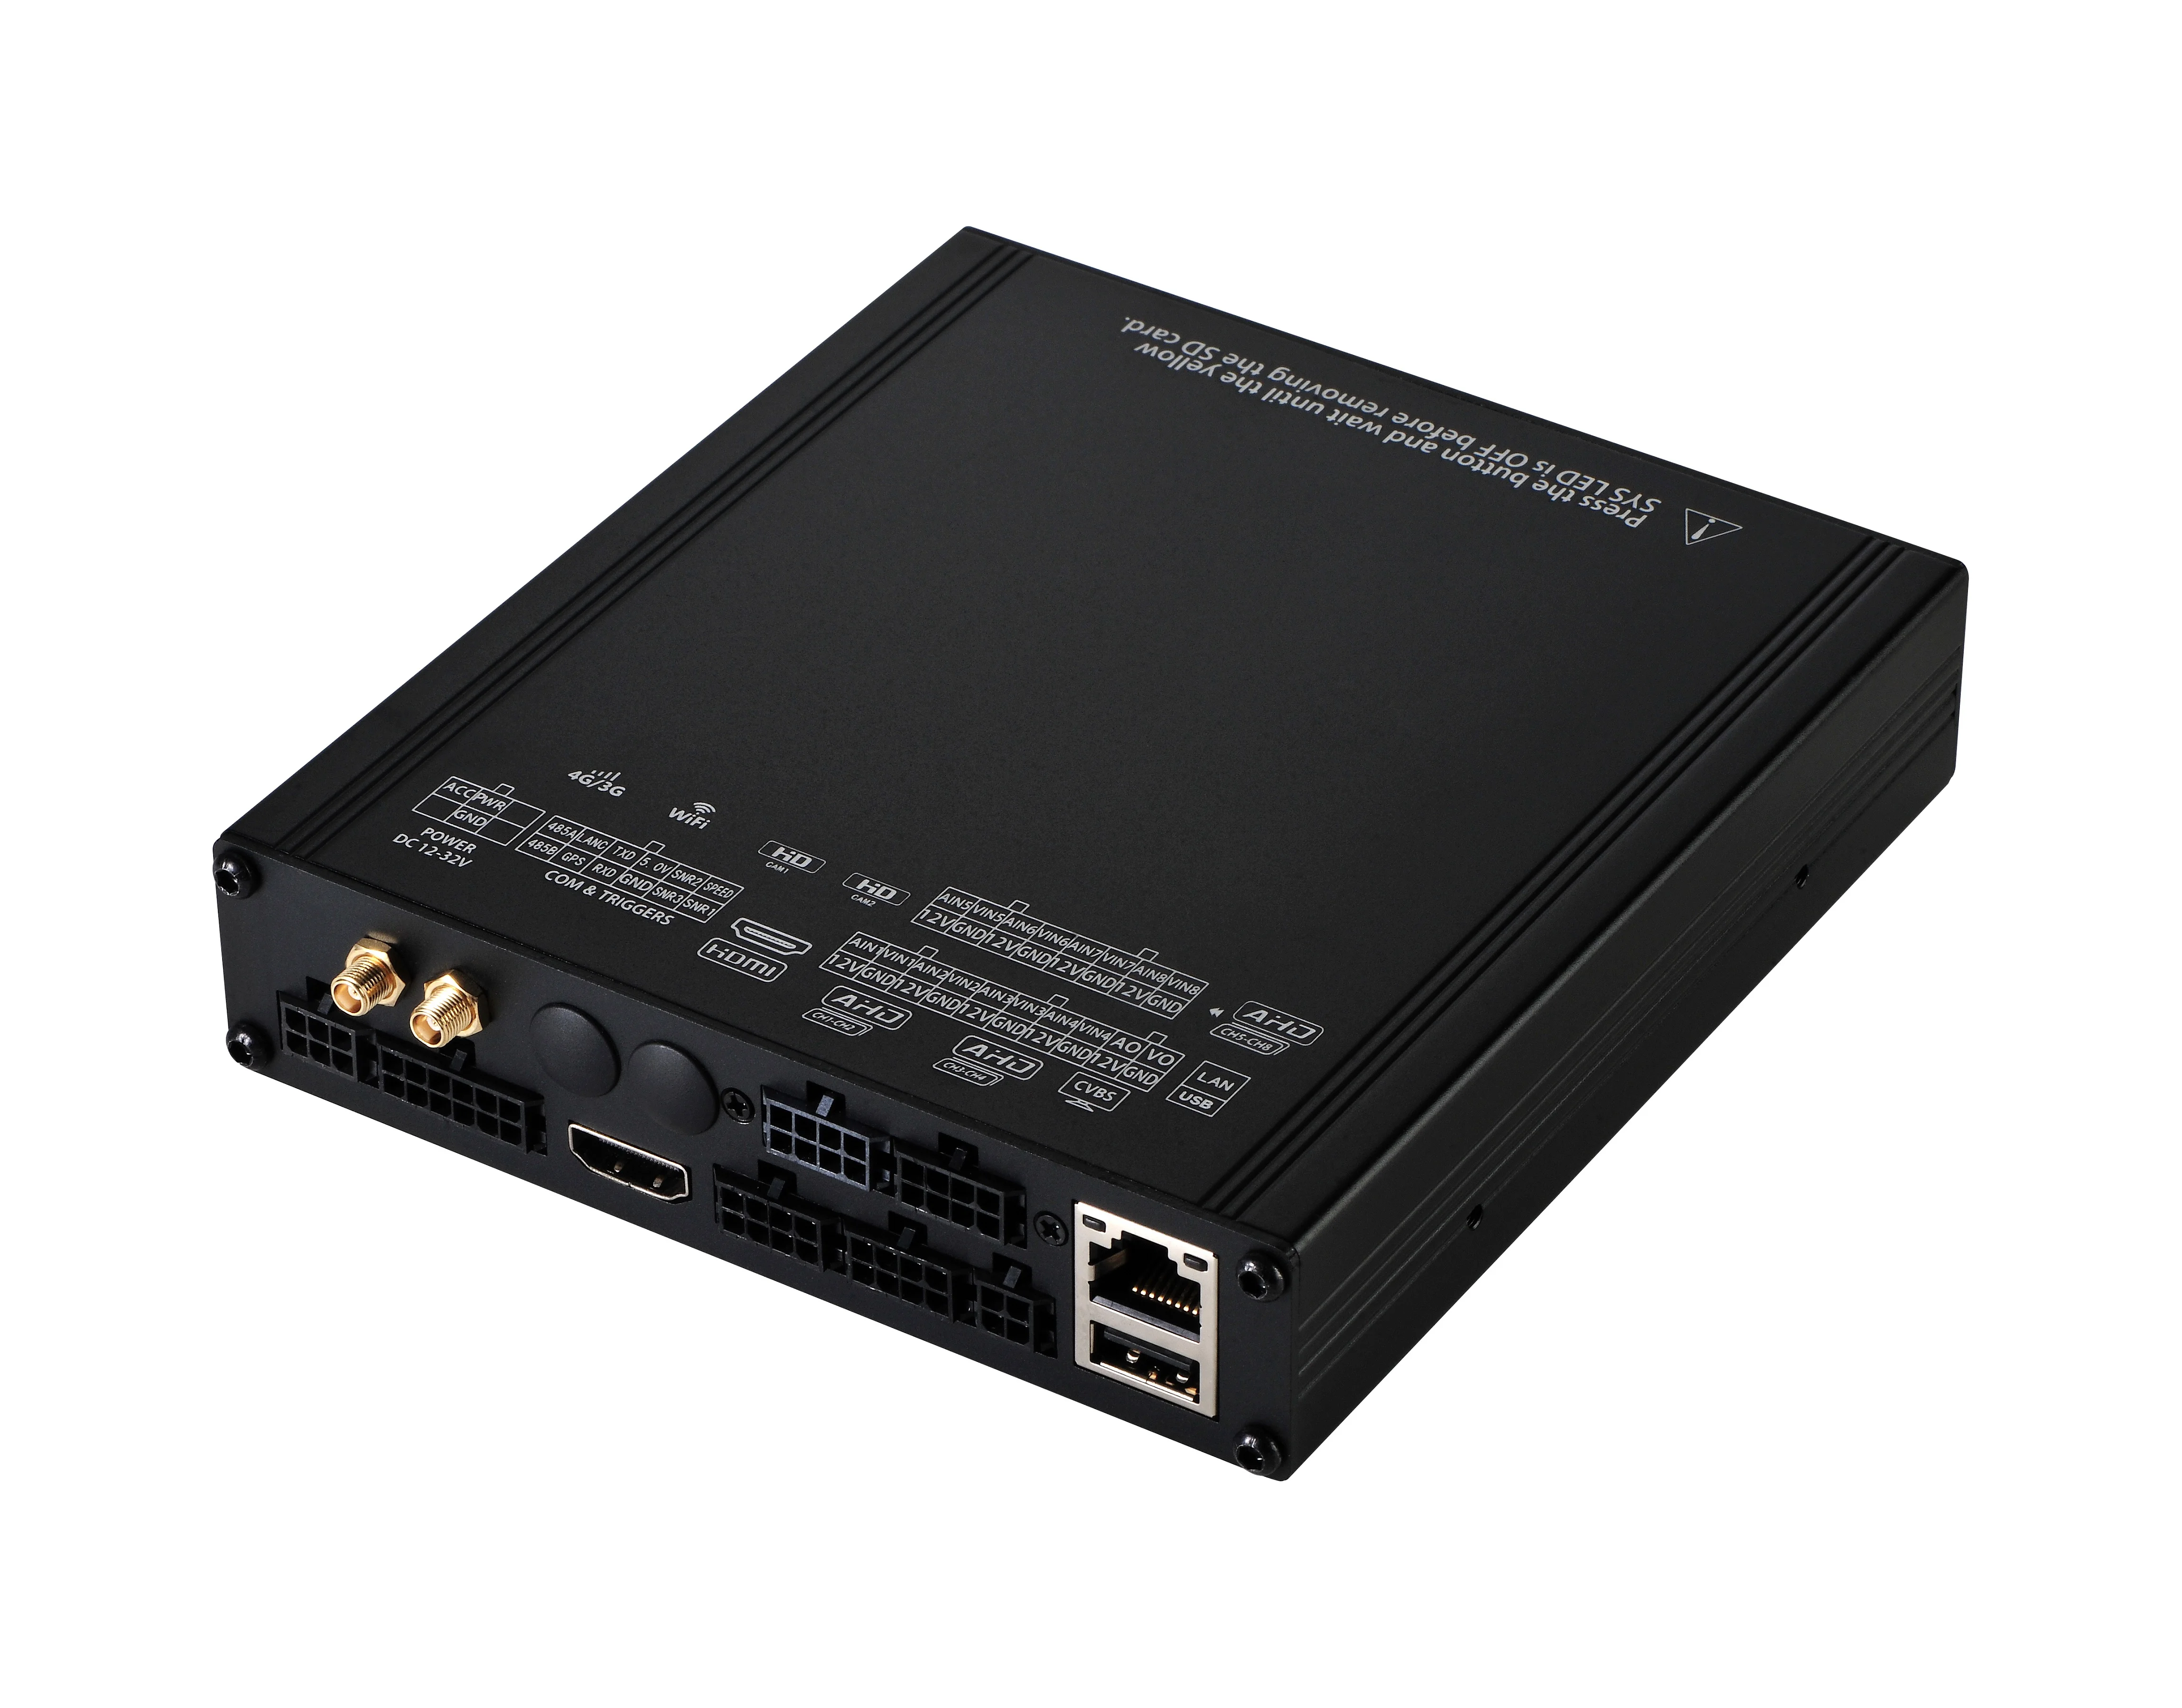 MDVR with G-sesor GPS 3G 4G HD Video Recorder